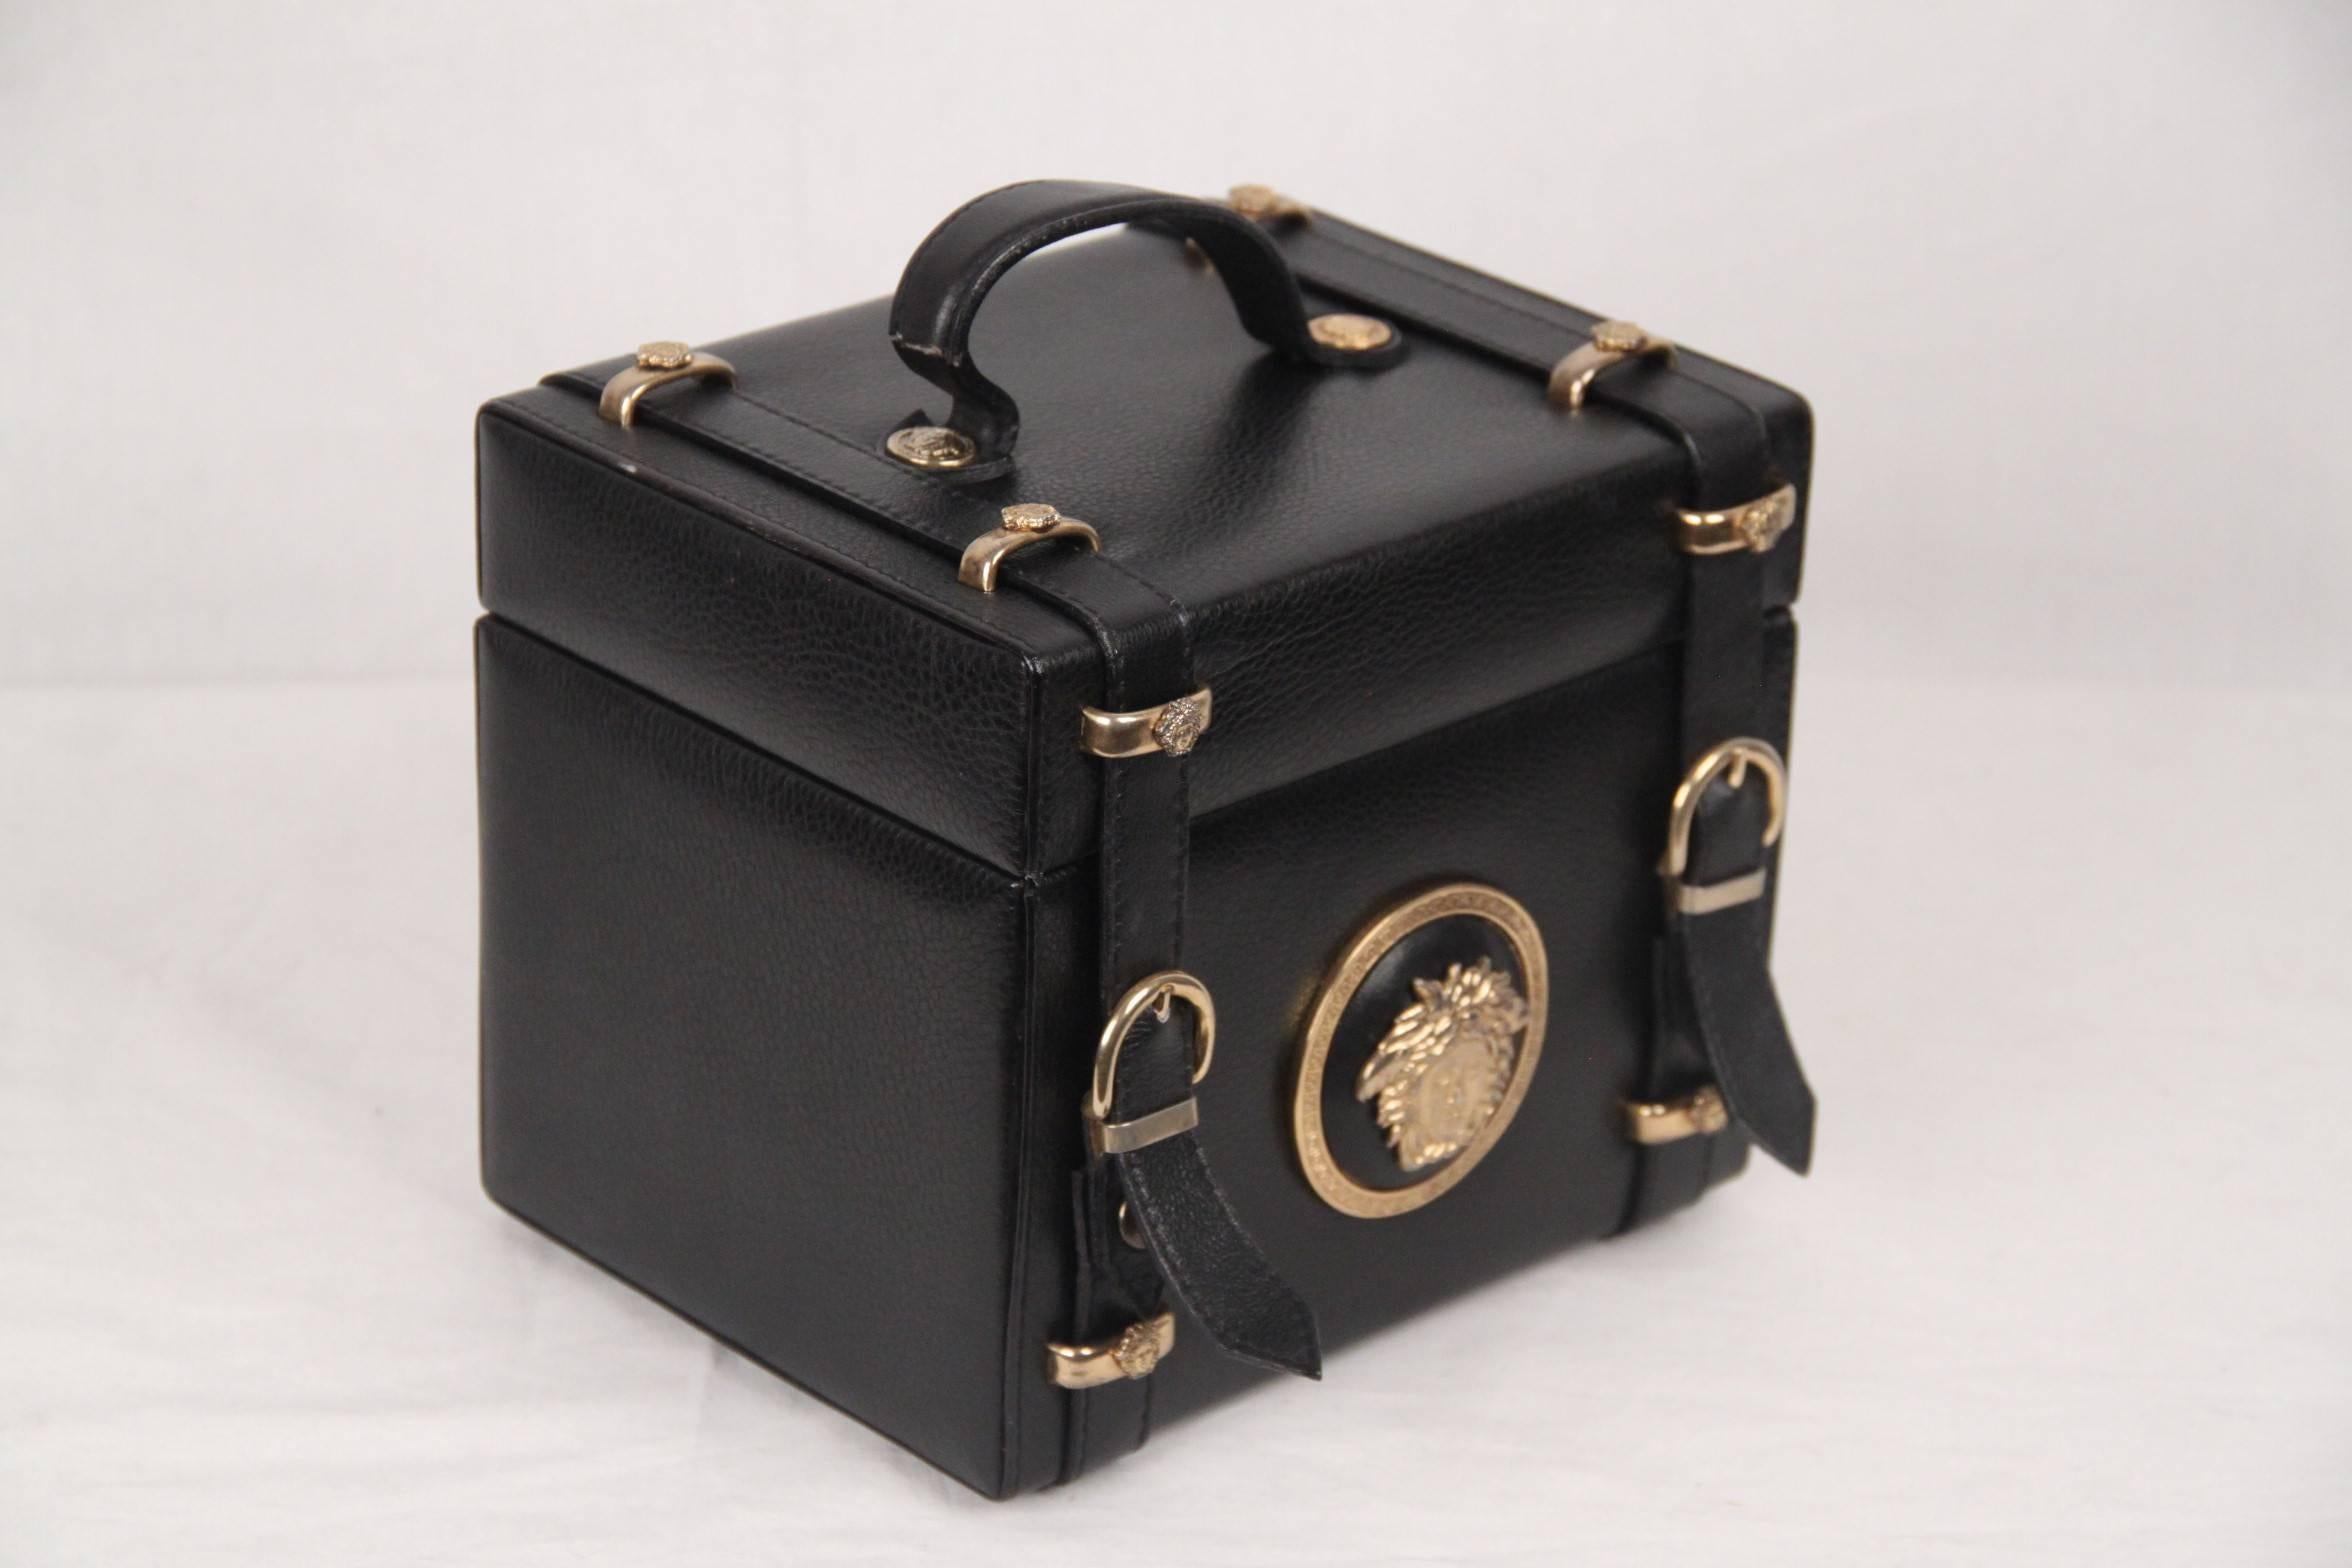 Rare & vintage 'Gianni Versace Couture' Vanity bag from the late 80s - early 90s, with Medusa hardware. Top carry handle, big iconic MEDUSA head on the front and protective bottom feet.

Brand:GIANNI VERSACE Couture- made in Italy

Logos / Tags: